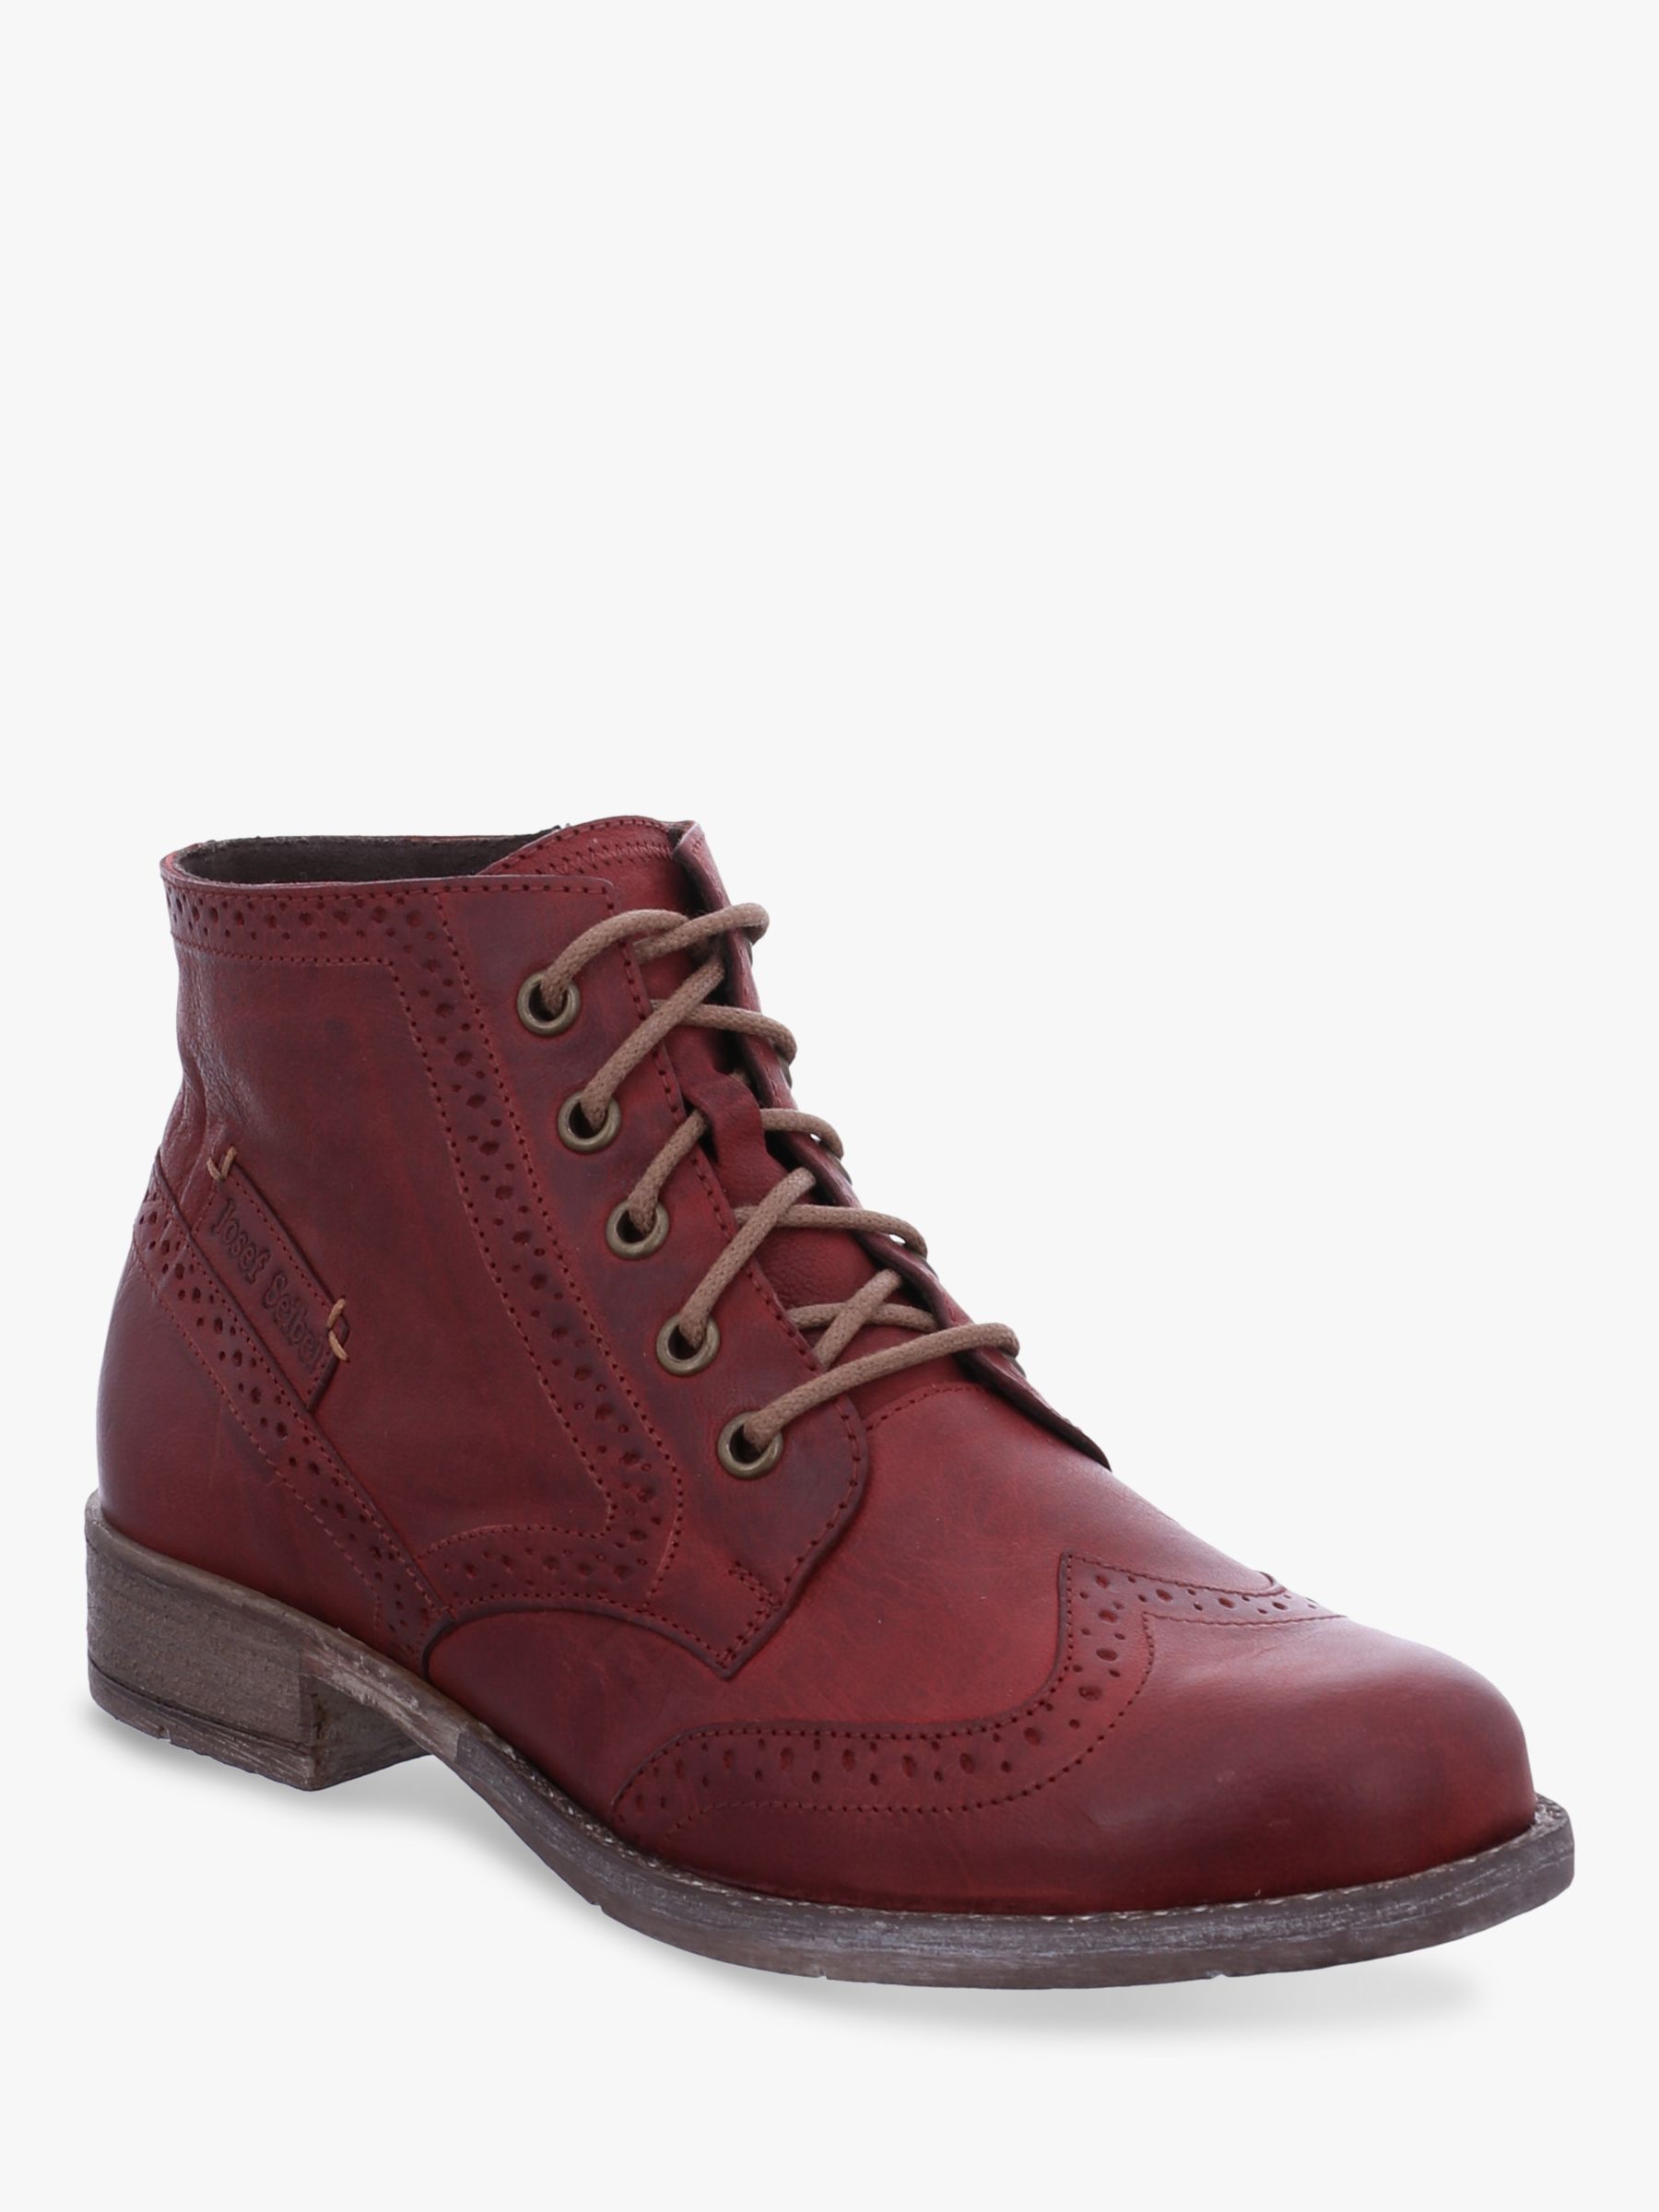 Josef Seibel Sienna 74 Leather Lace Up Ankle Boots, Bordeaux at John ...